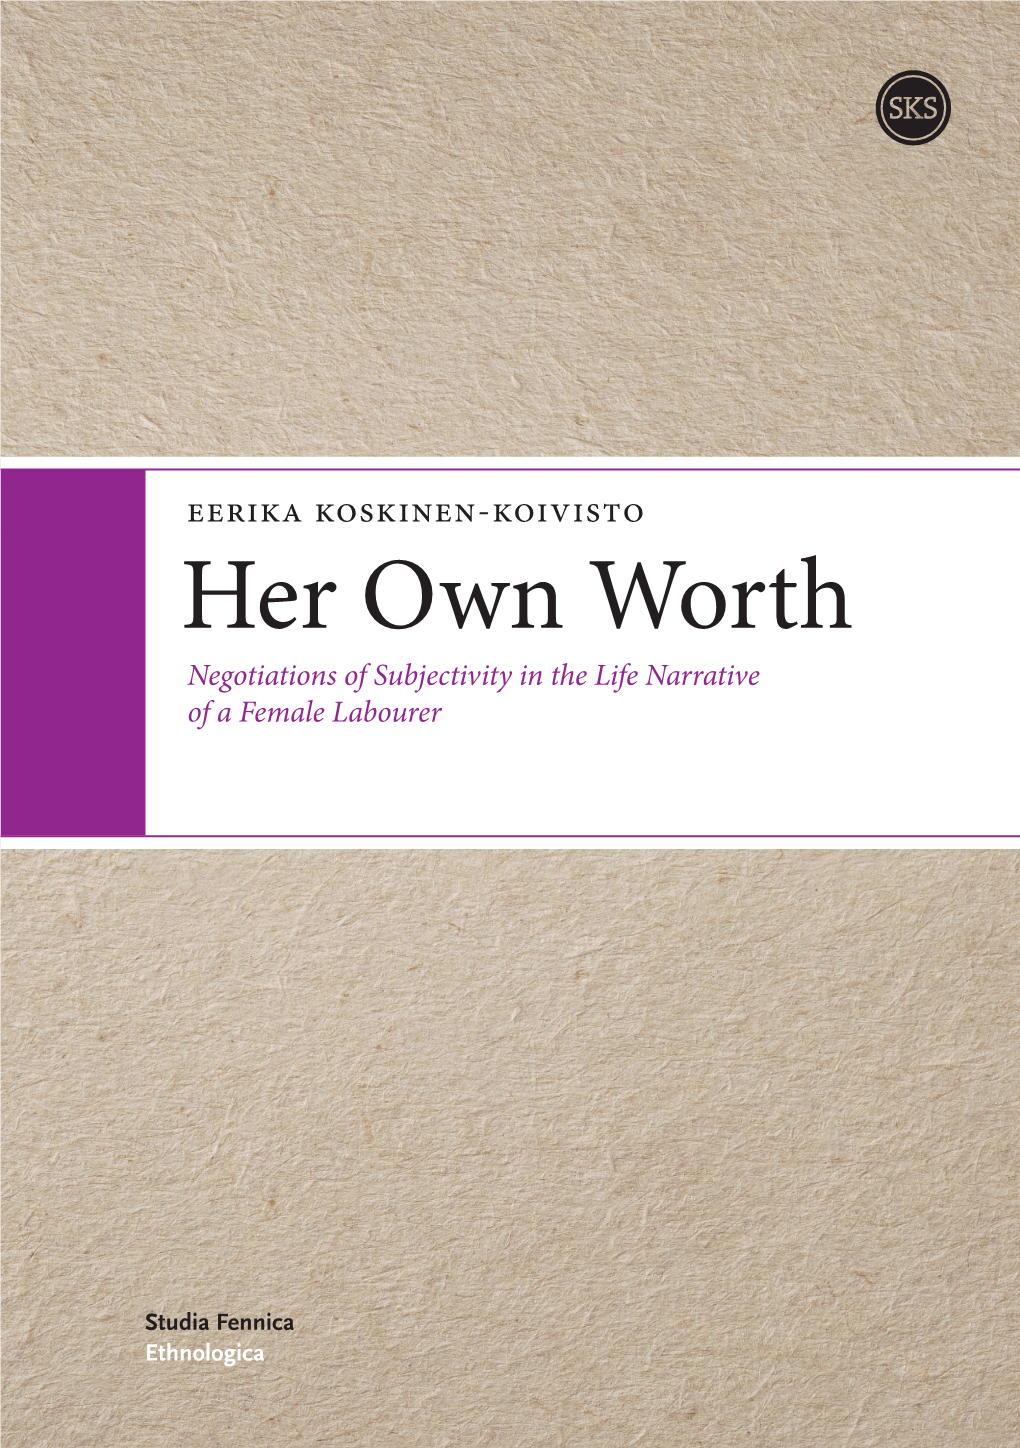 Her Own Worth Negotiations of Subjectivity in the Life Narrative of a Female Labourer